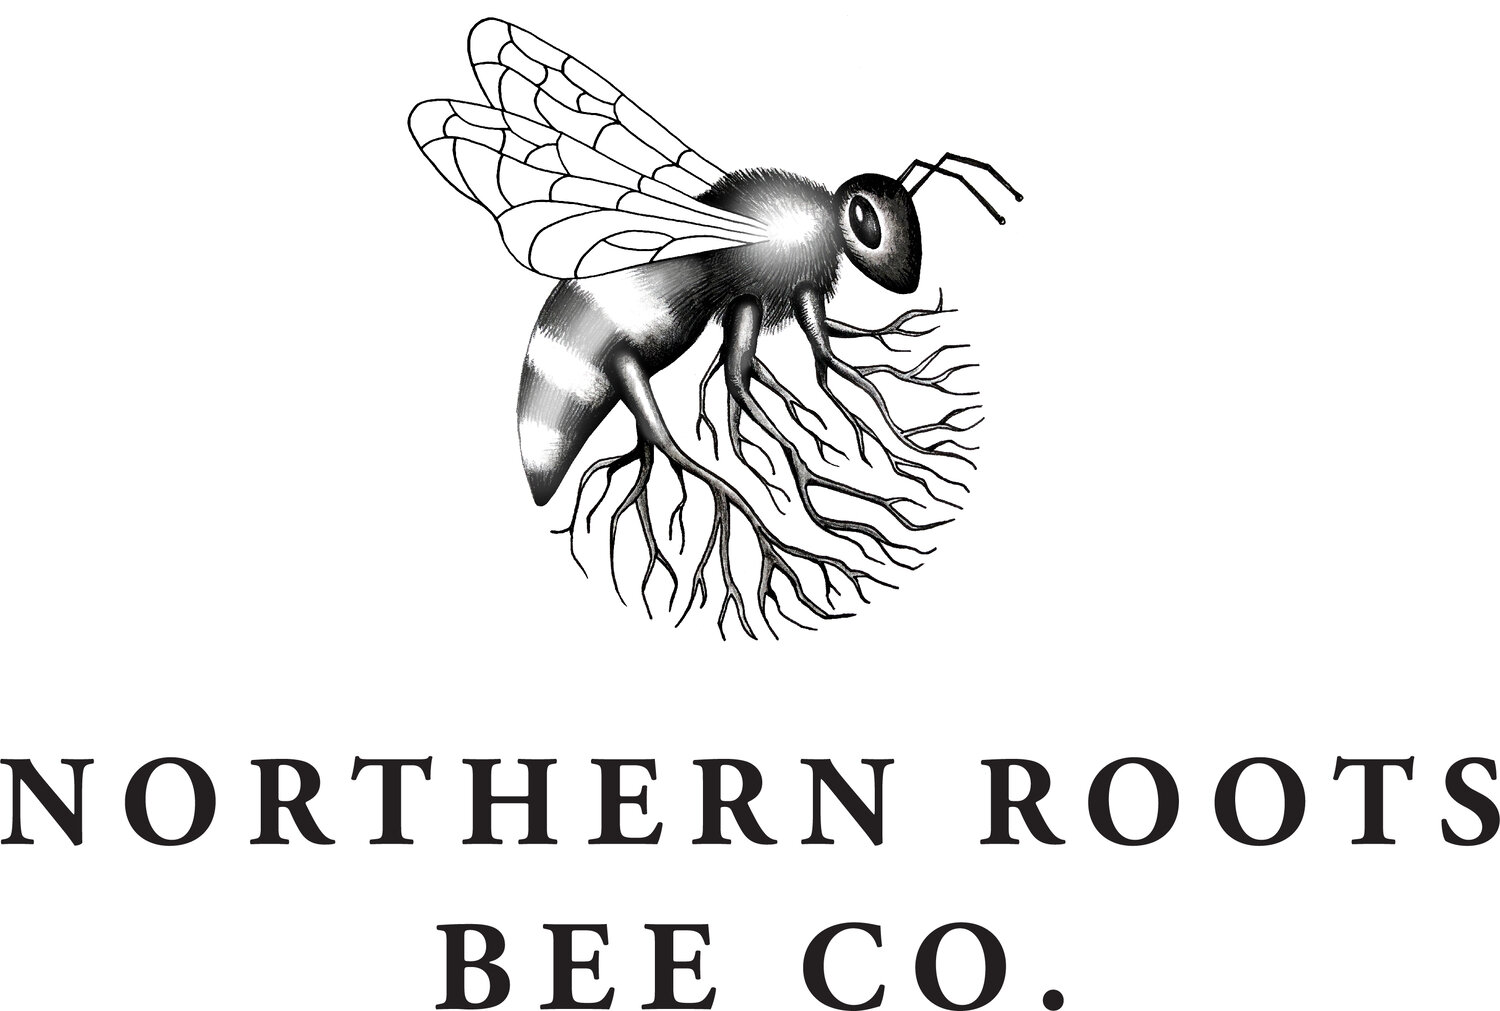 Northern Roots Bee Co.